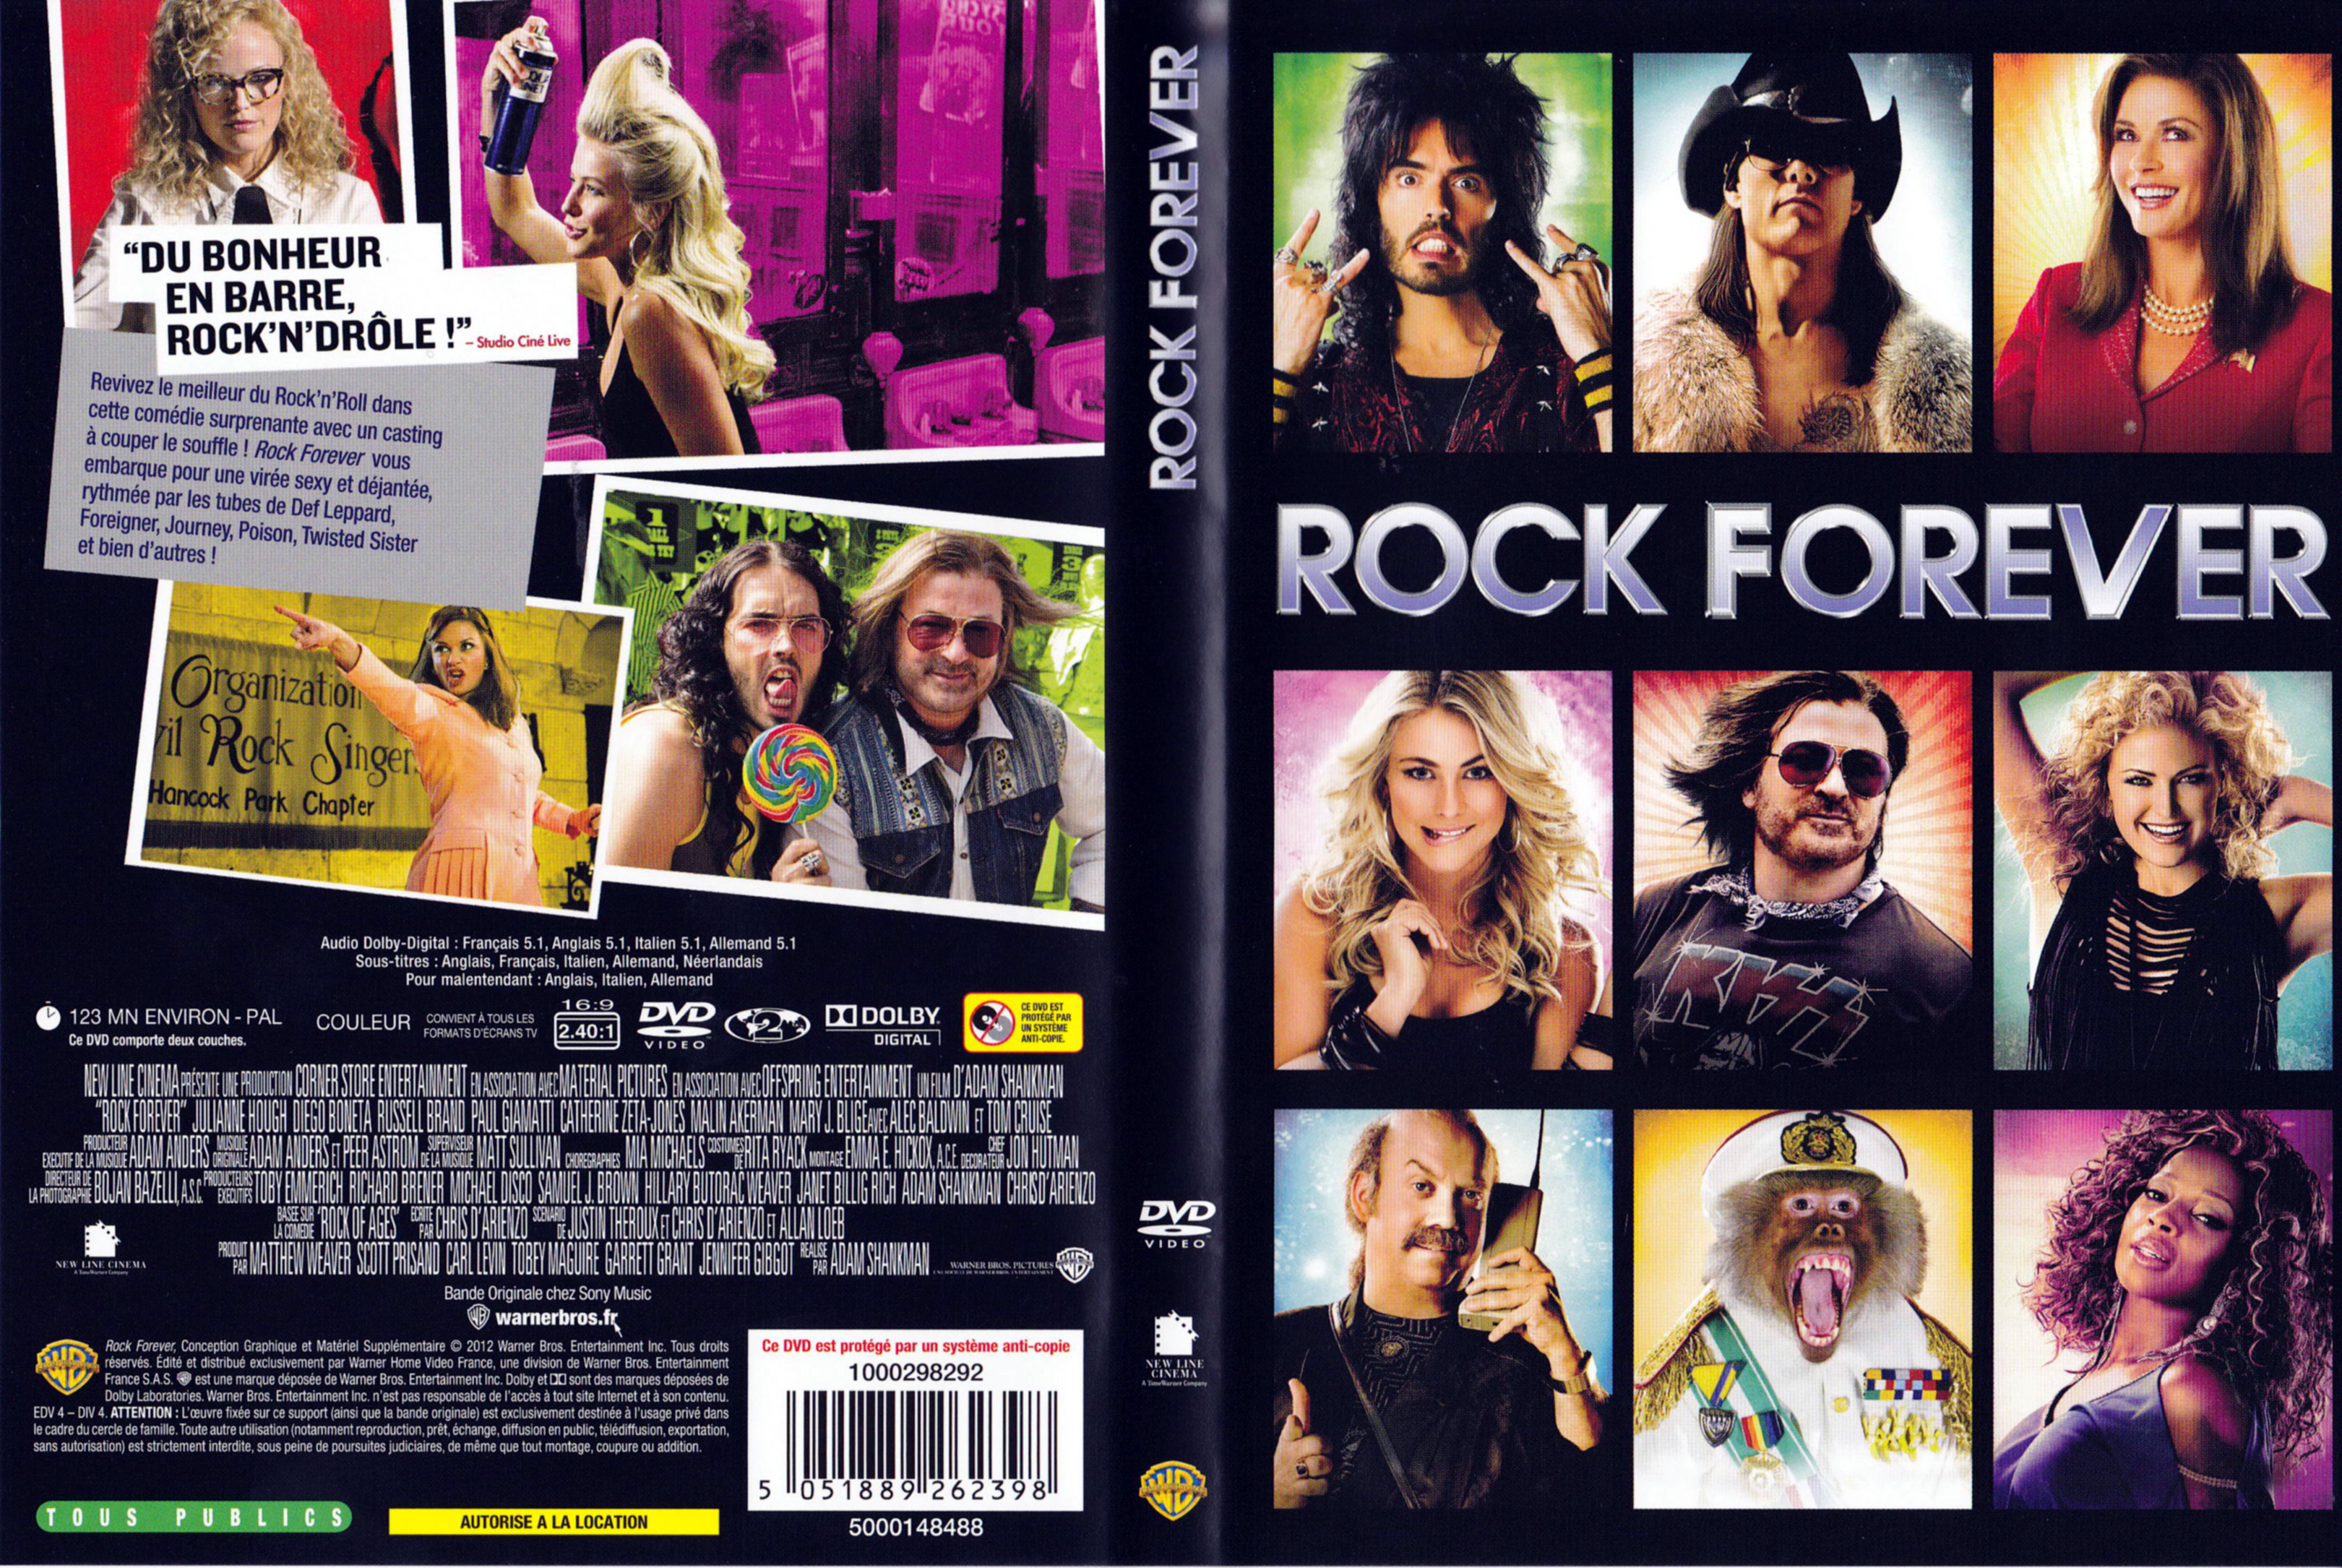 Jaquette DVD Rock forever